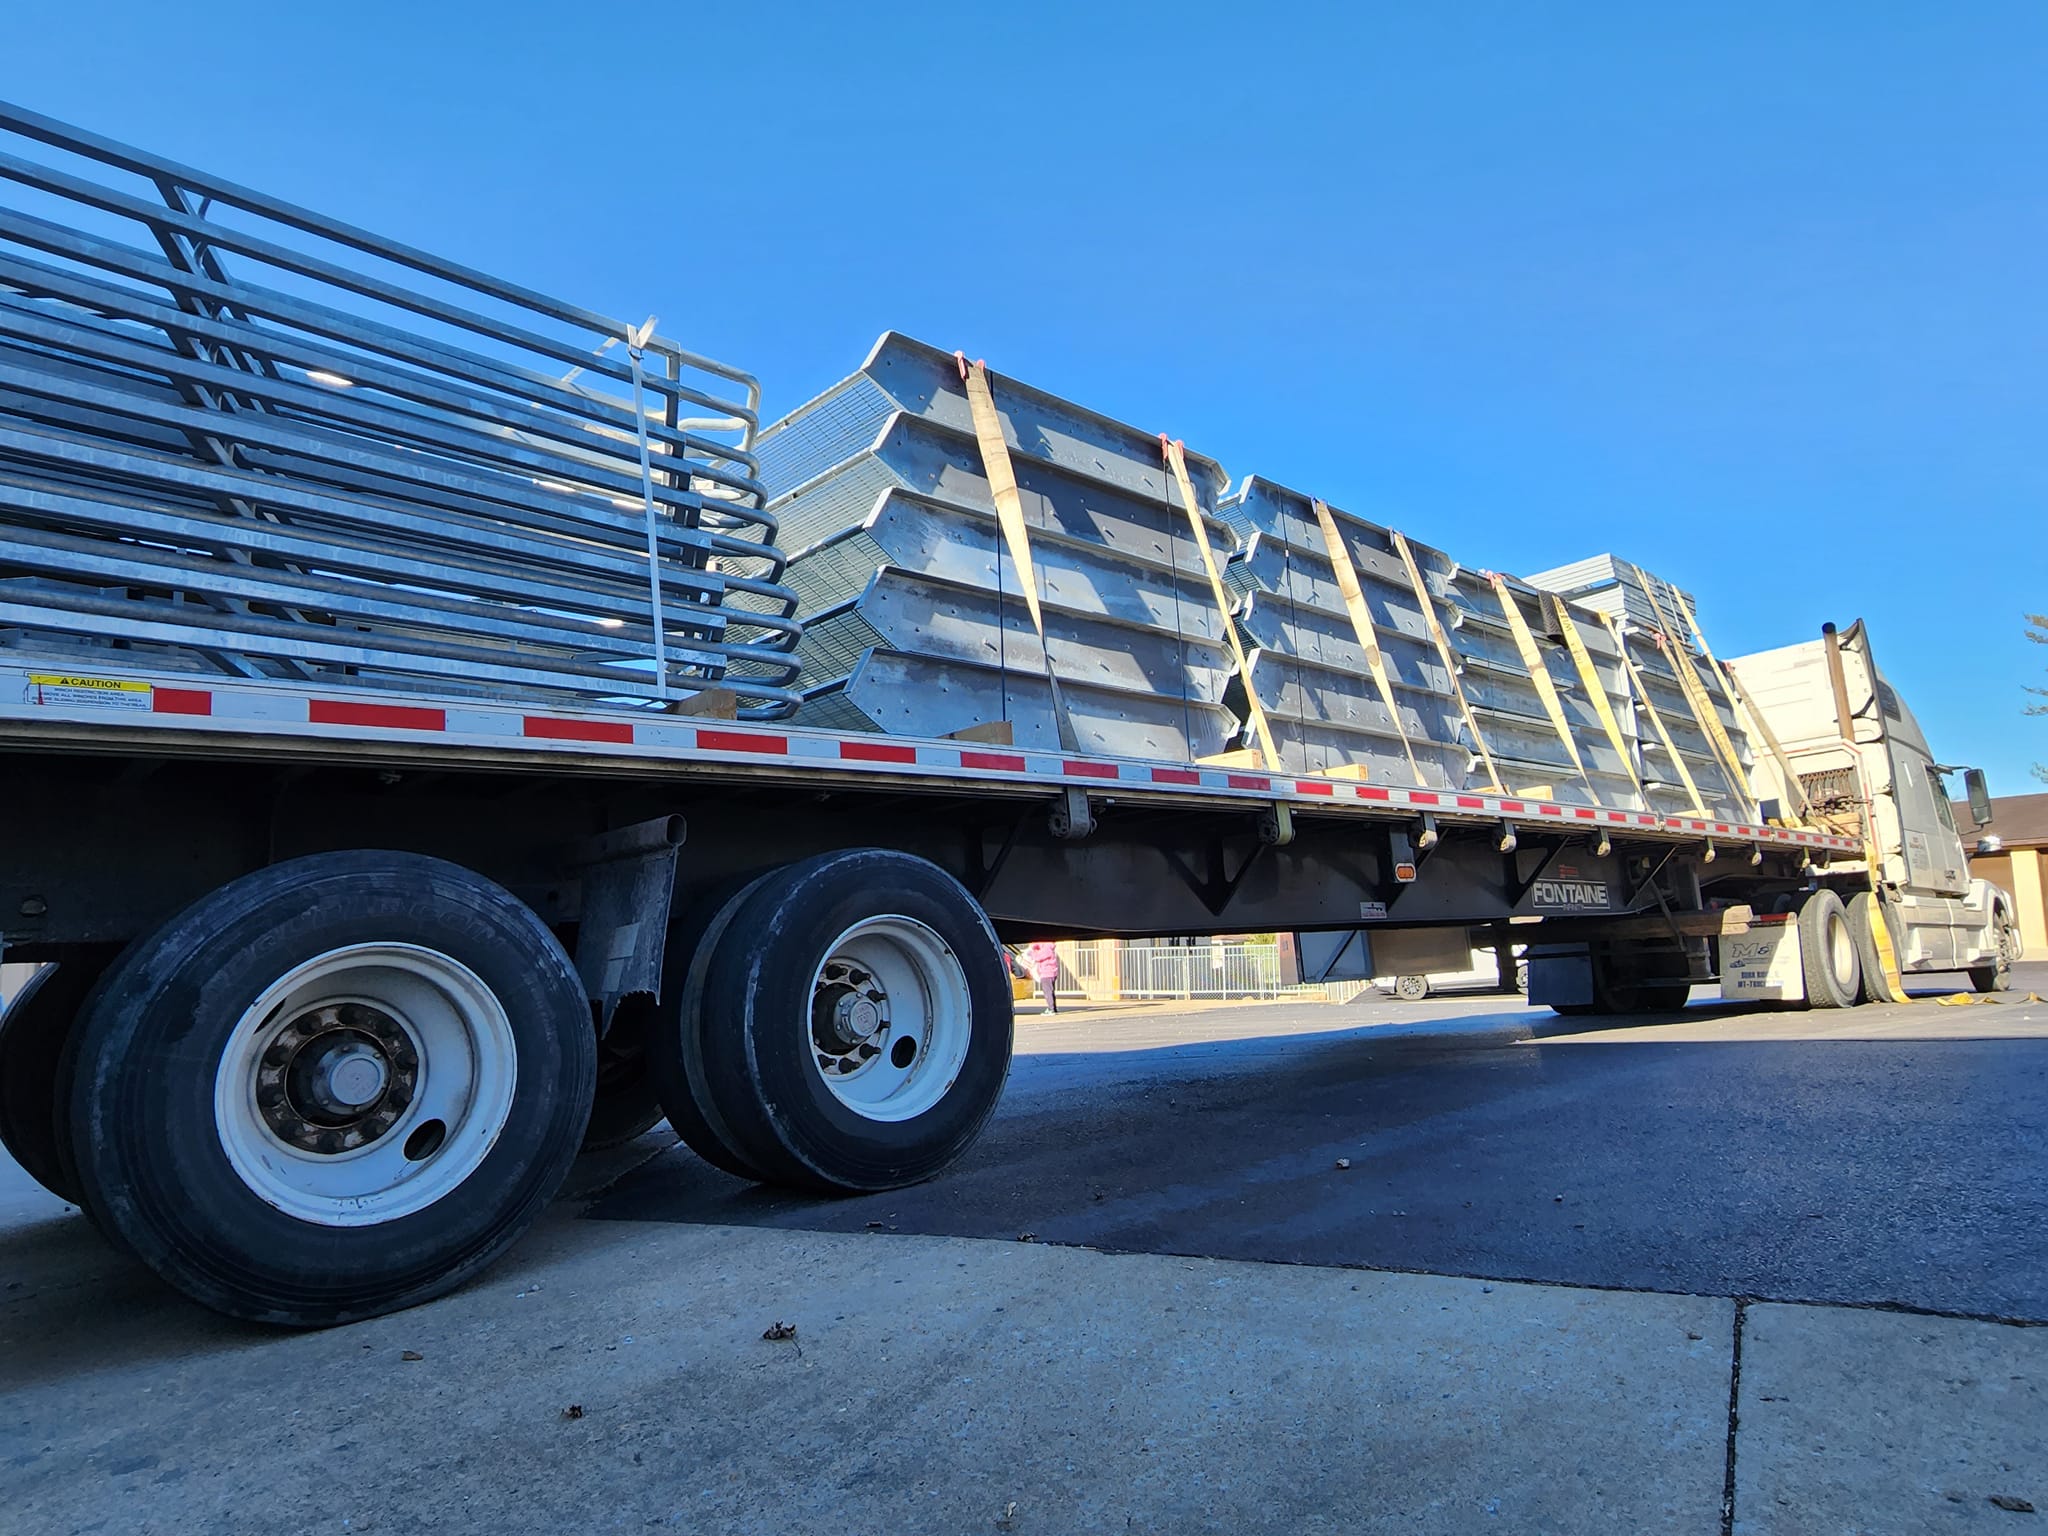 Truck loaded with galvanized dock stair components